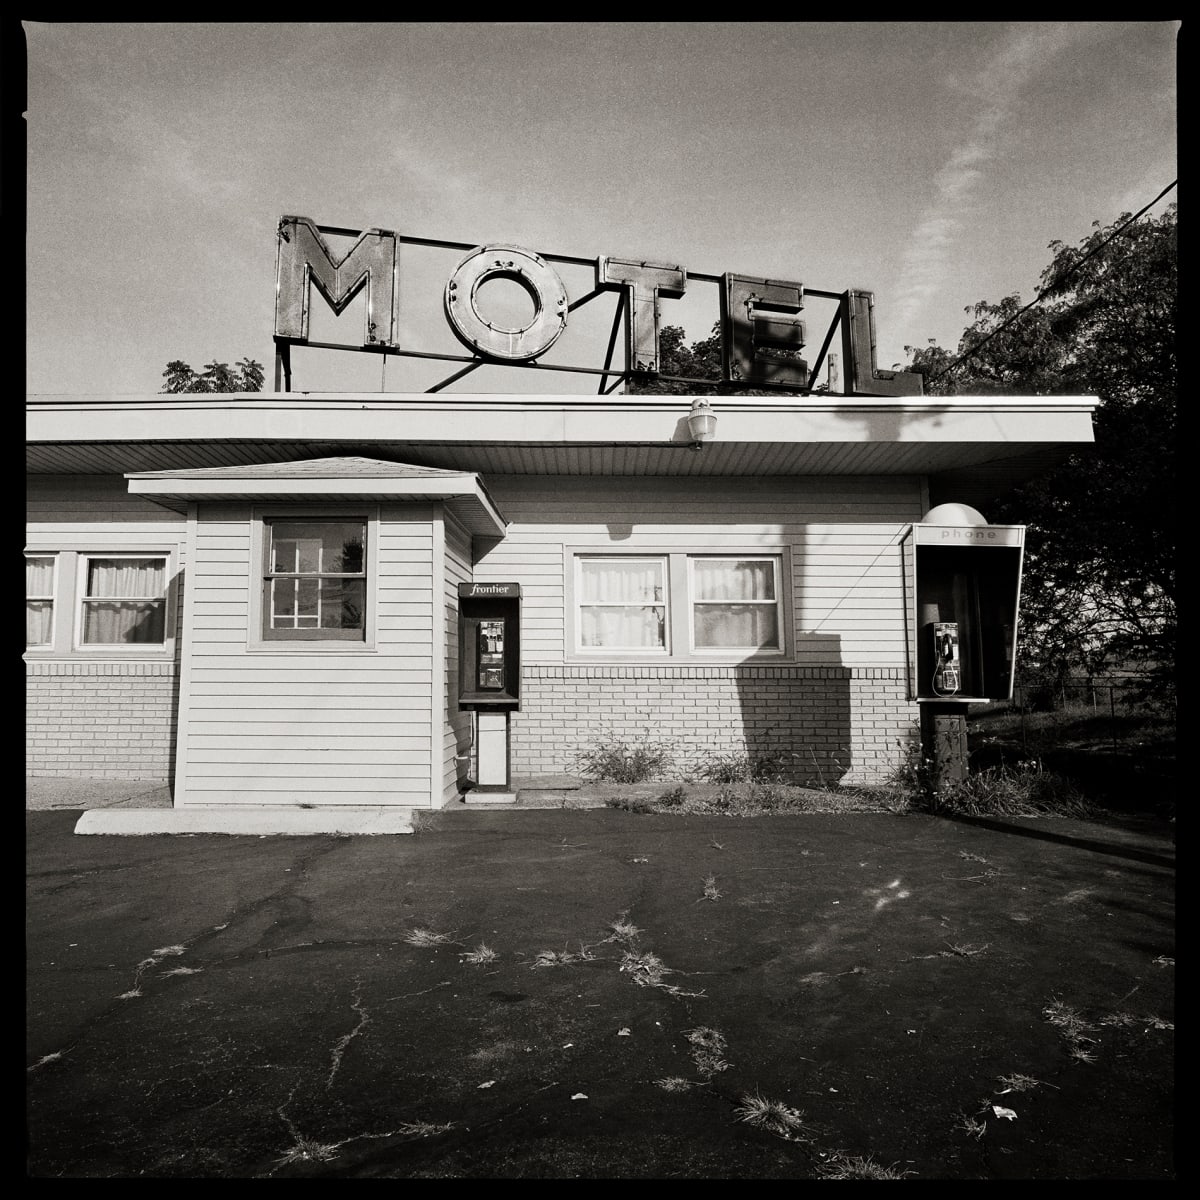 585.235.9340 & 585.235.9923 – 490 Motel, 360 Mount Read Boulevard Rochester, NY 14611 by Eric T. Kunsman  Image: ID: A black and white image shows two payphones against a motel building.  One in mounted to the center of the building and the other is on a pole to the right of the building.  There is a large "Motel" sign on the roof of the building.